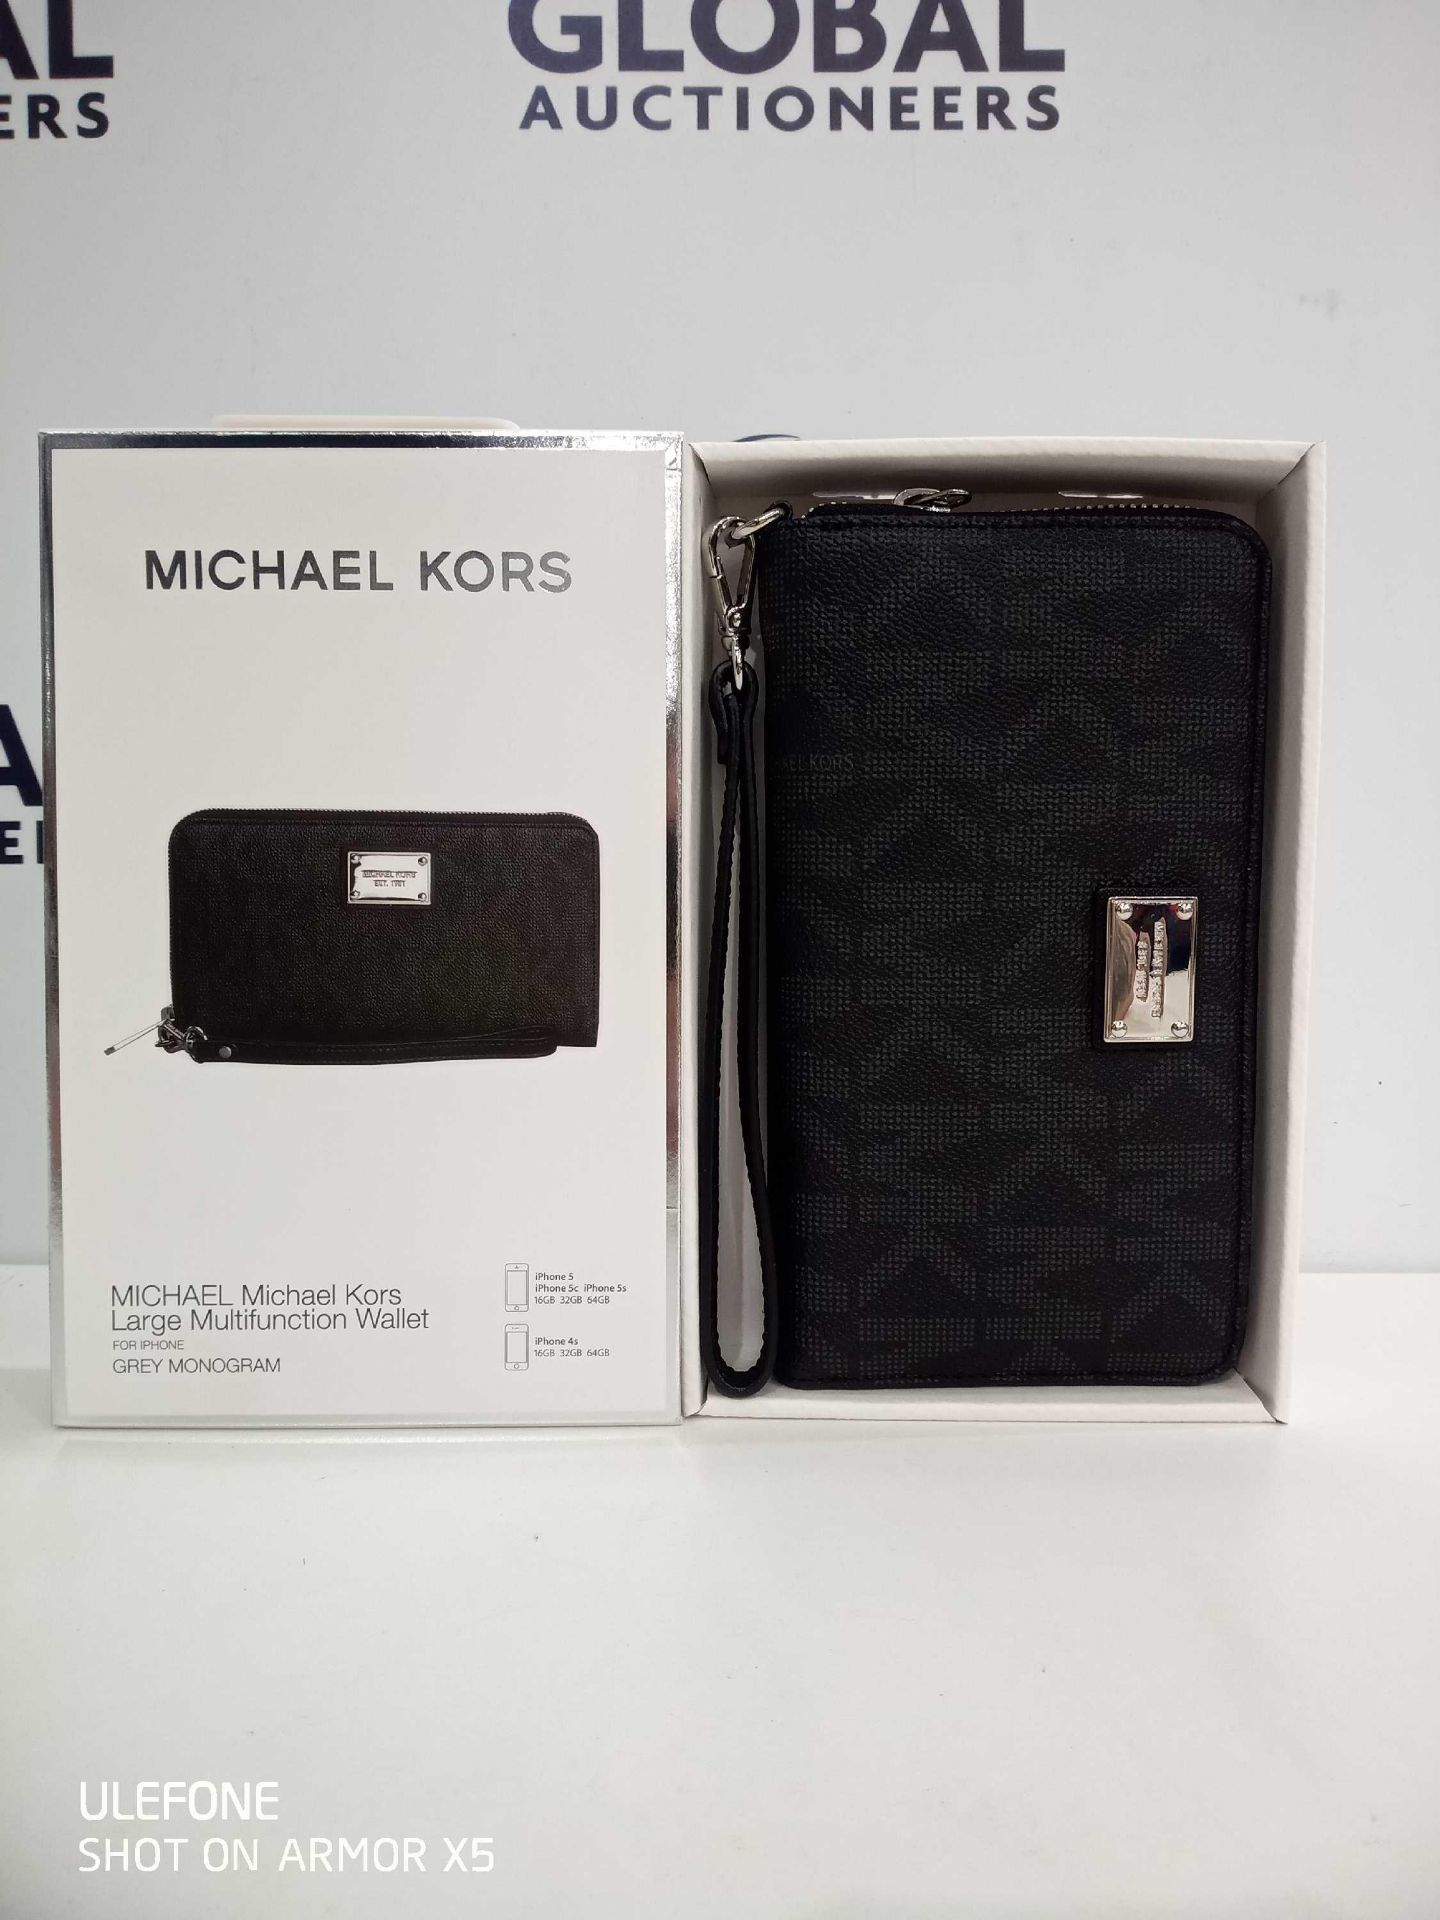 RRP £100 Boxed Michael Kors Grey Monogram Large Multifunction Purse Or Wallet For Iphone 5 - Image 4 of 6